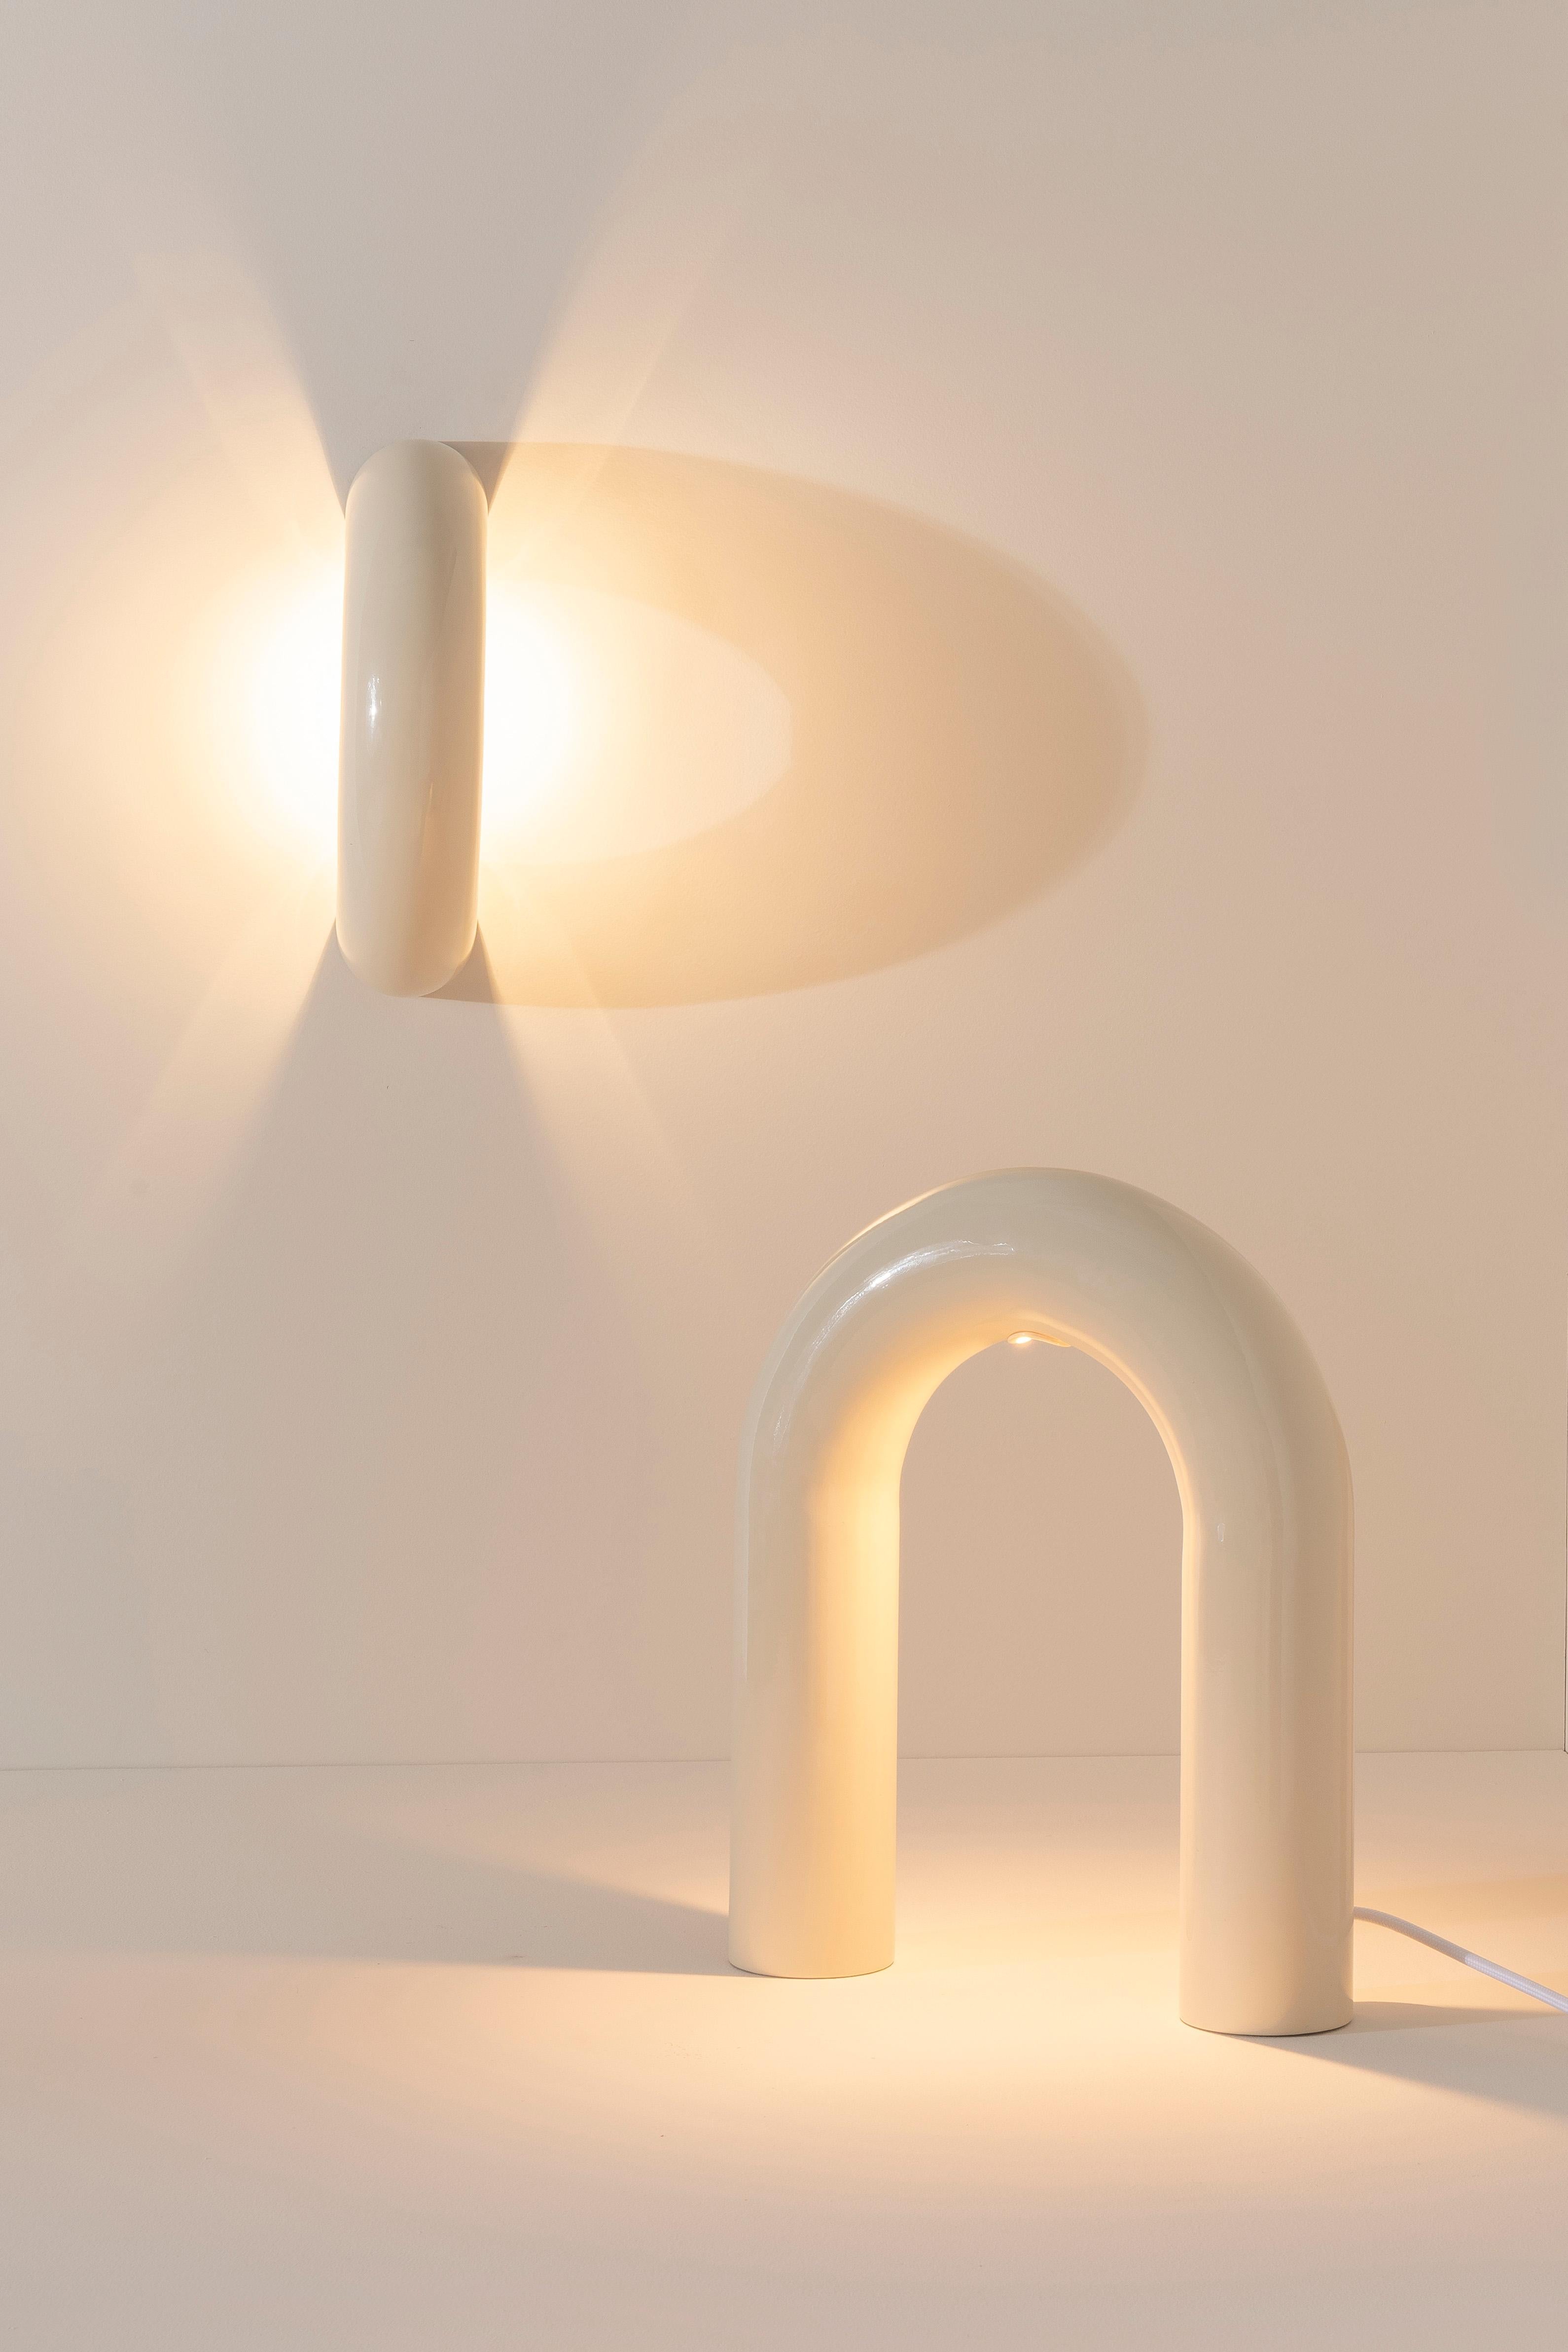 Arco Lamp, Silver, by Rain, Contemporary Wall Lamp, Stainless Steel In New Condition For Sale In Sao Paulo, SP